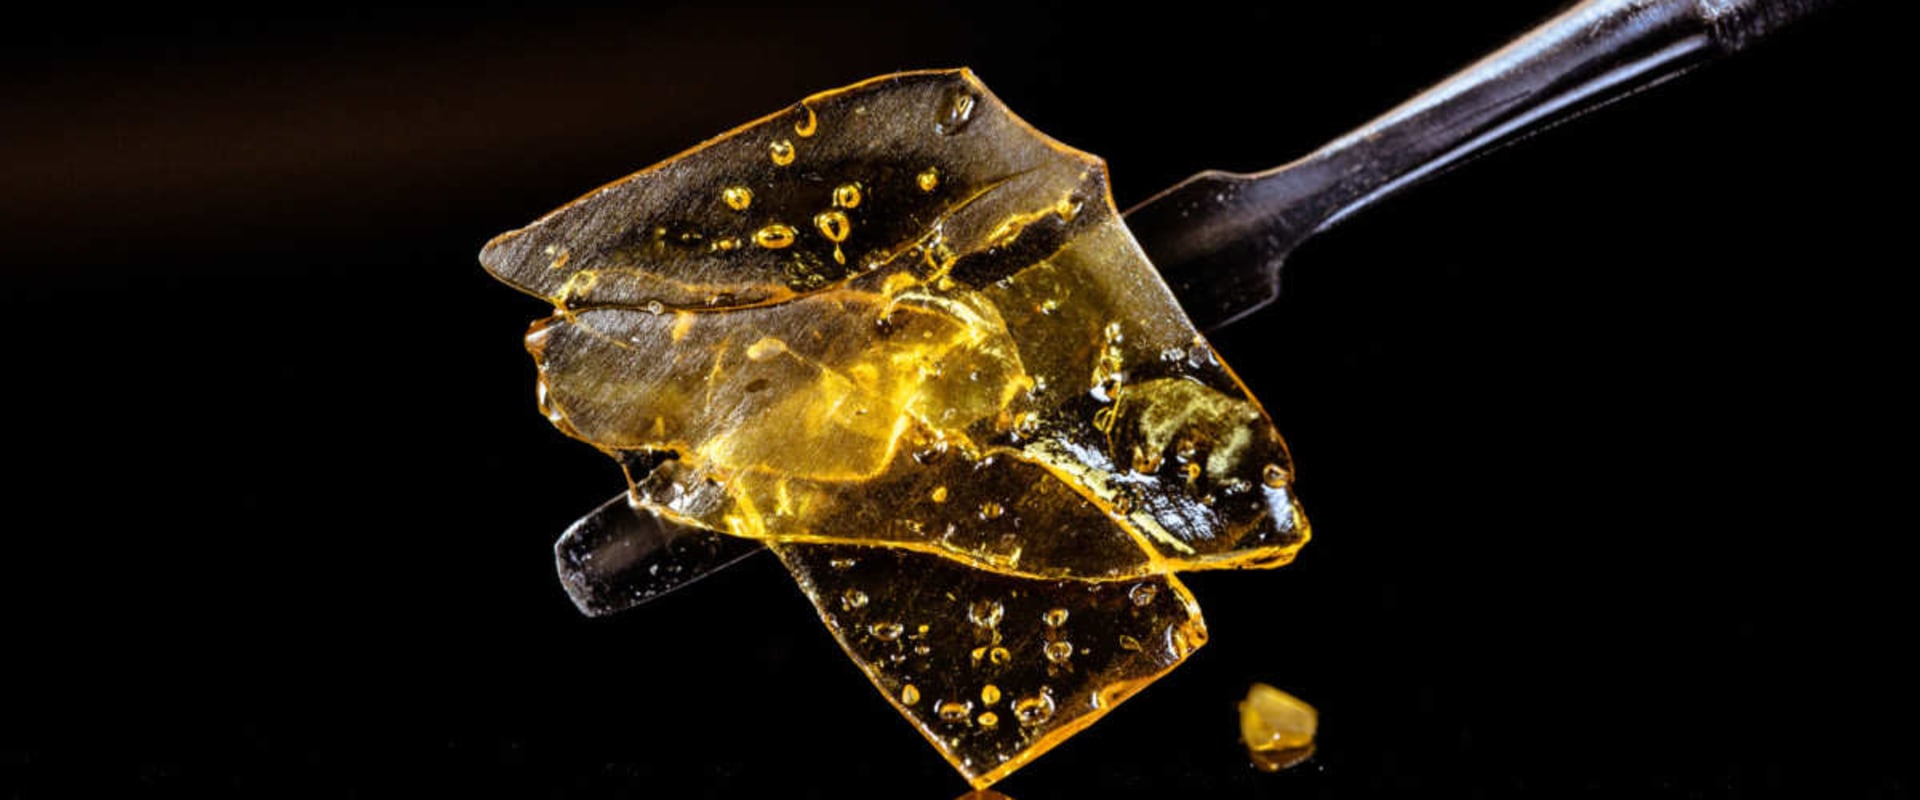 What is the difference between shatter and wax thc?